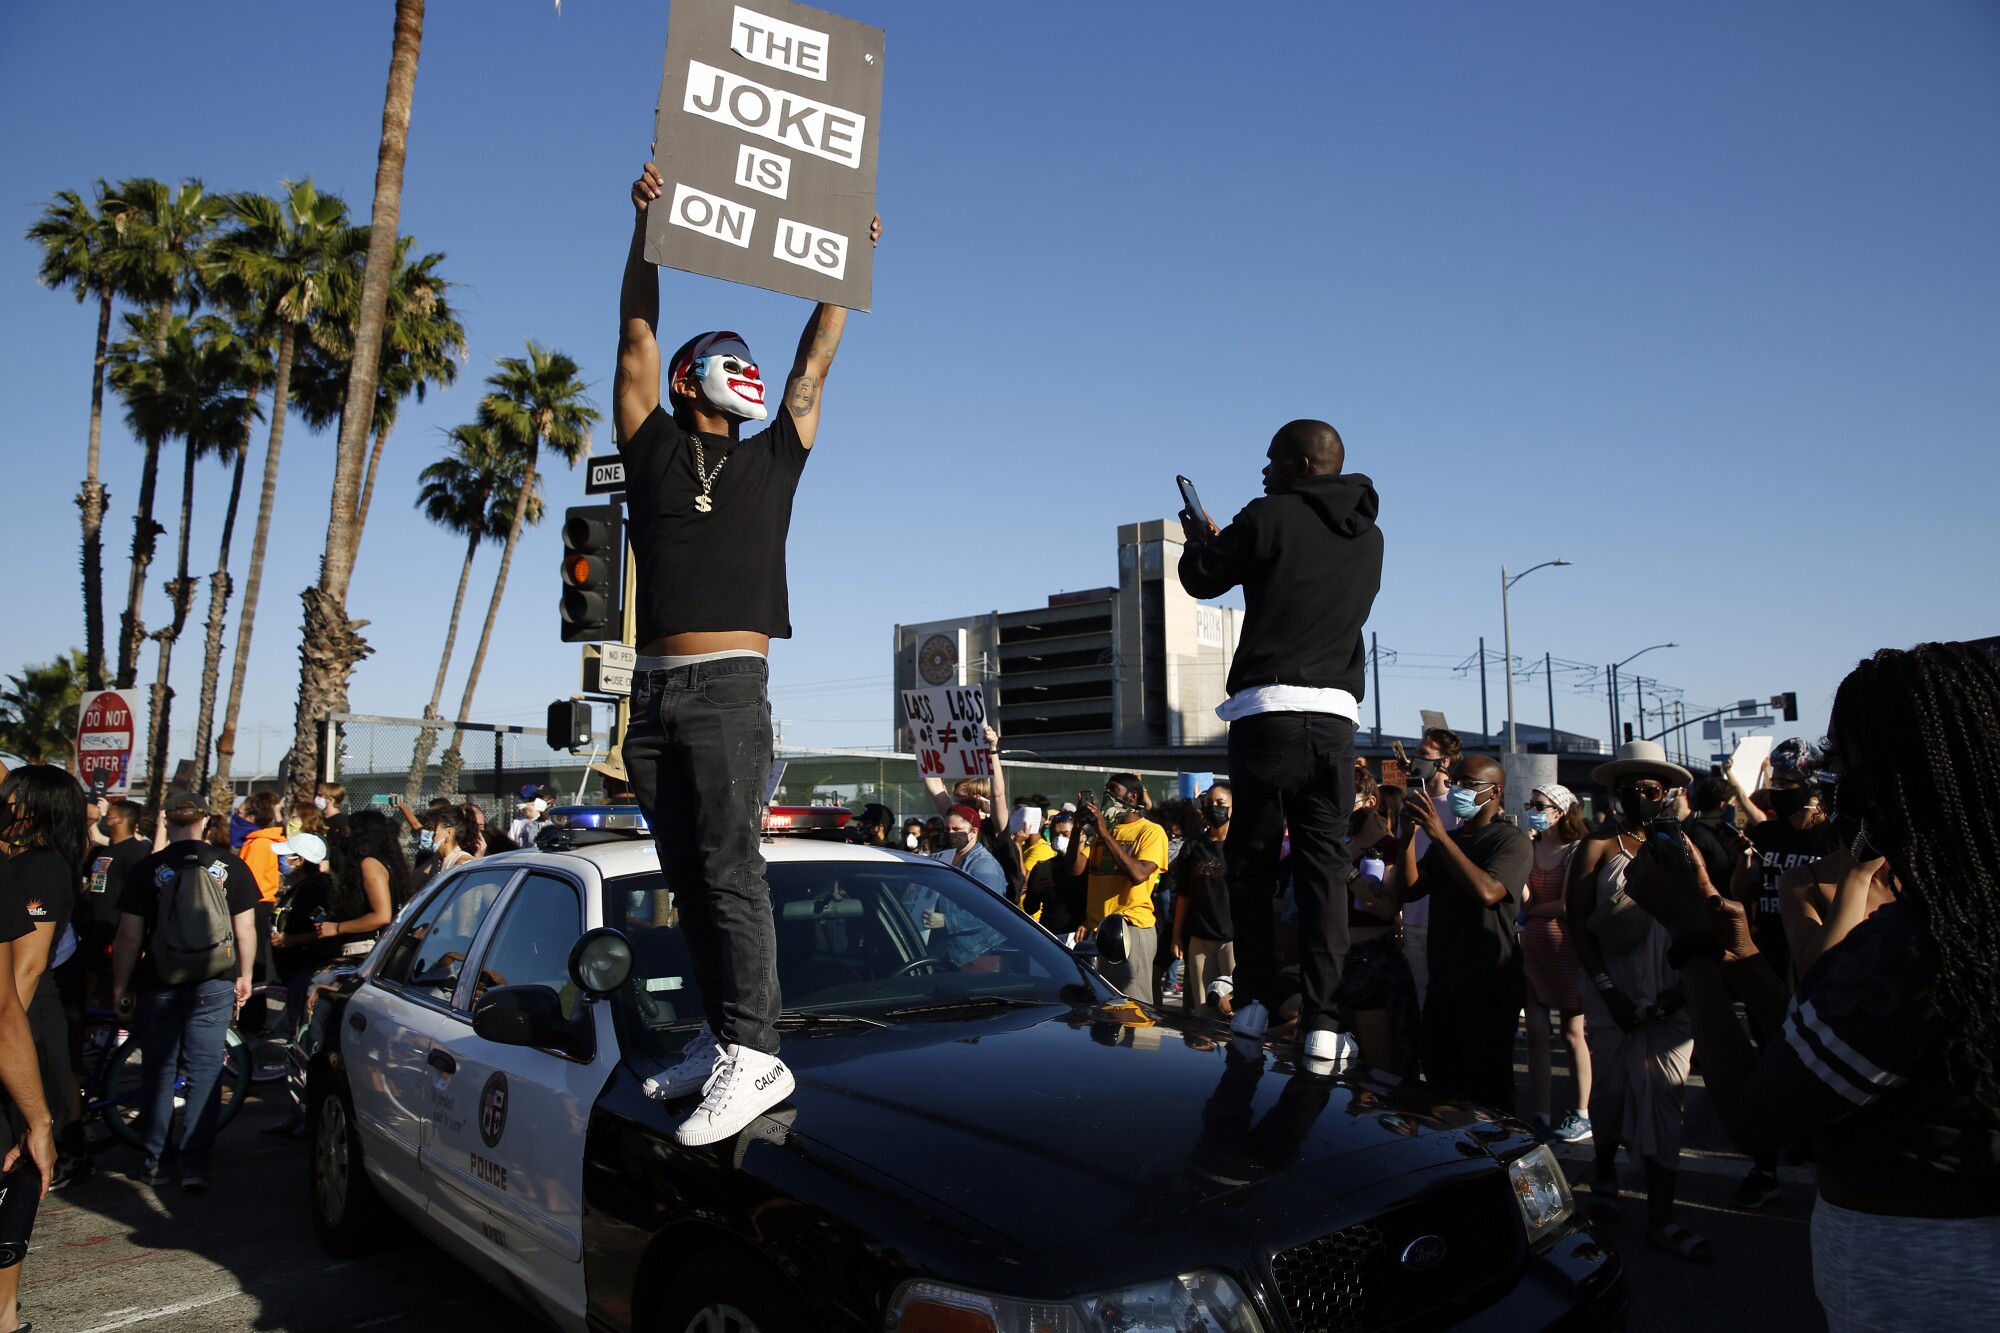 Protesters stand on a LAPD cruiser during a Black Lives Matter protest in downtown Los Angeles